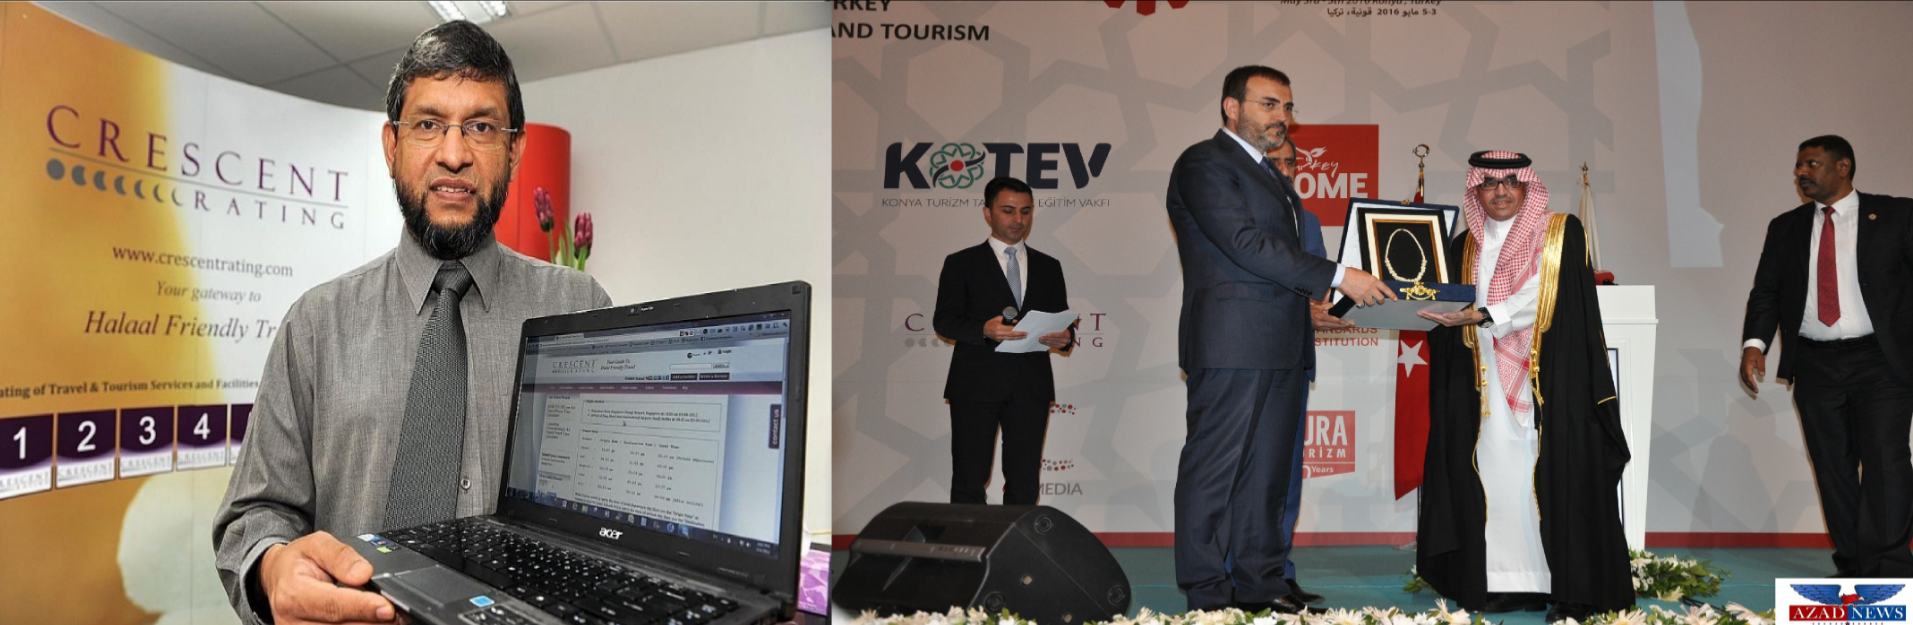 CEO, CrescentRating Fazal Bahardeen (left) and 2nd Halal Tourism Conference held in Turkey